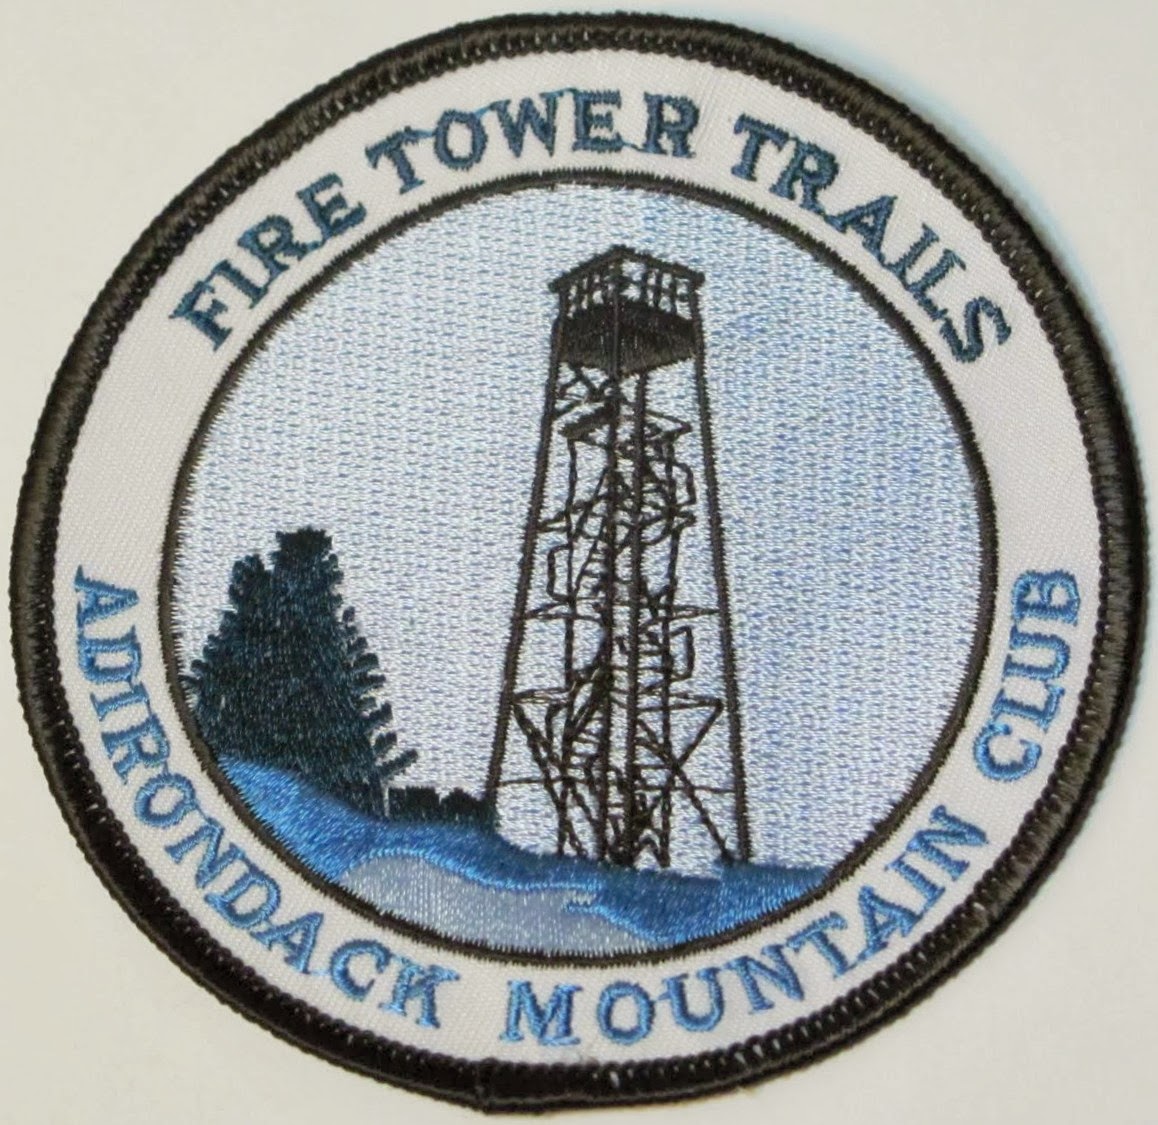 ADK Fire tower Challenge